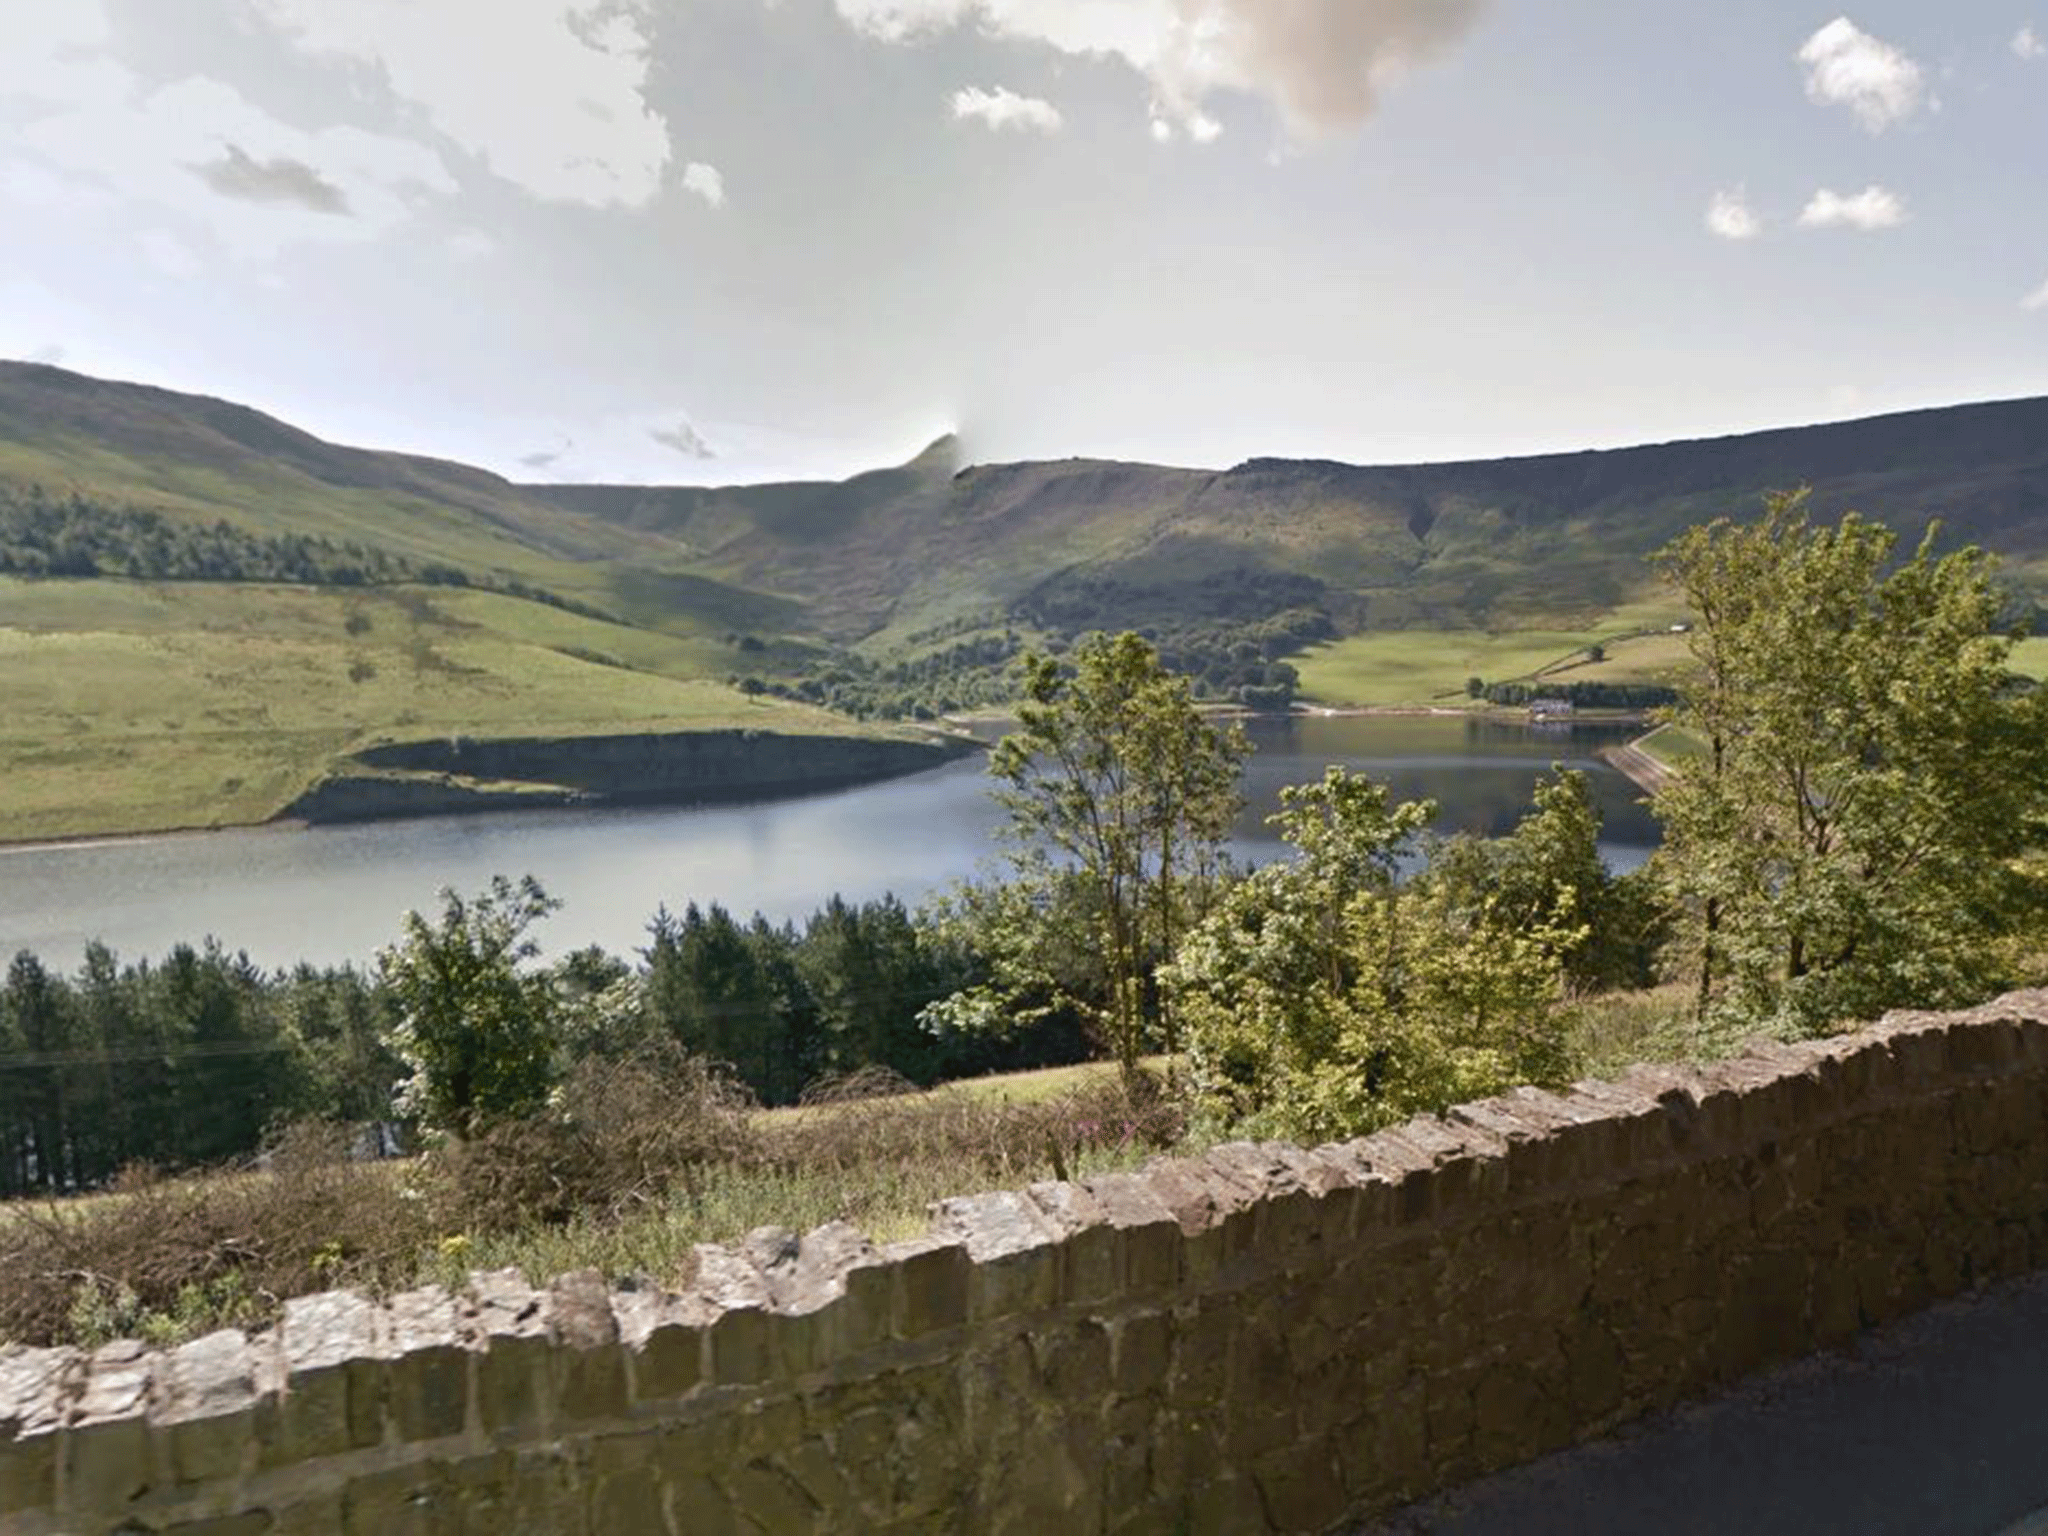 Dovestone Reservoir outside Manchester, with the track in the background into the mountains where the man was found